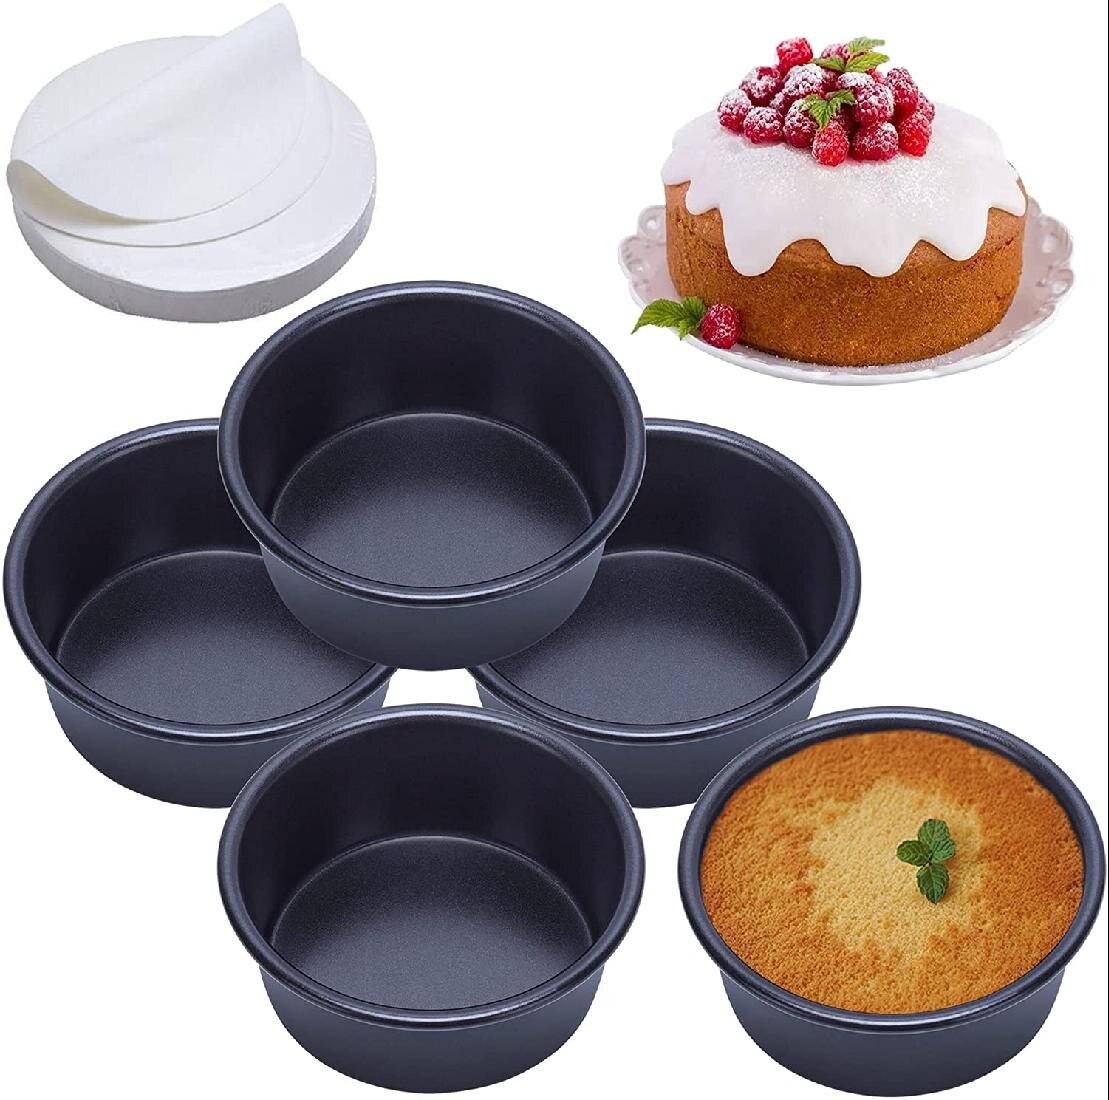 for Baking Steaming Serving Healthy & Heavy Duty DIY Mini Cake Pan Mould,Three-layer Stainless Steel Round Baking Tier Cake Pans Set Mirror Finish & Dishwasher Safe 